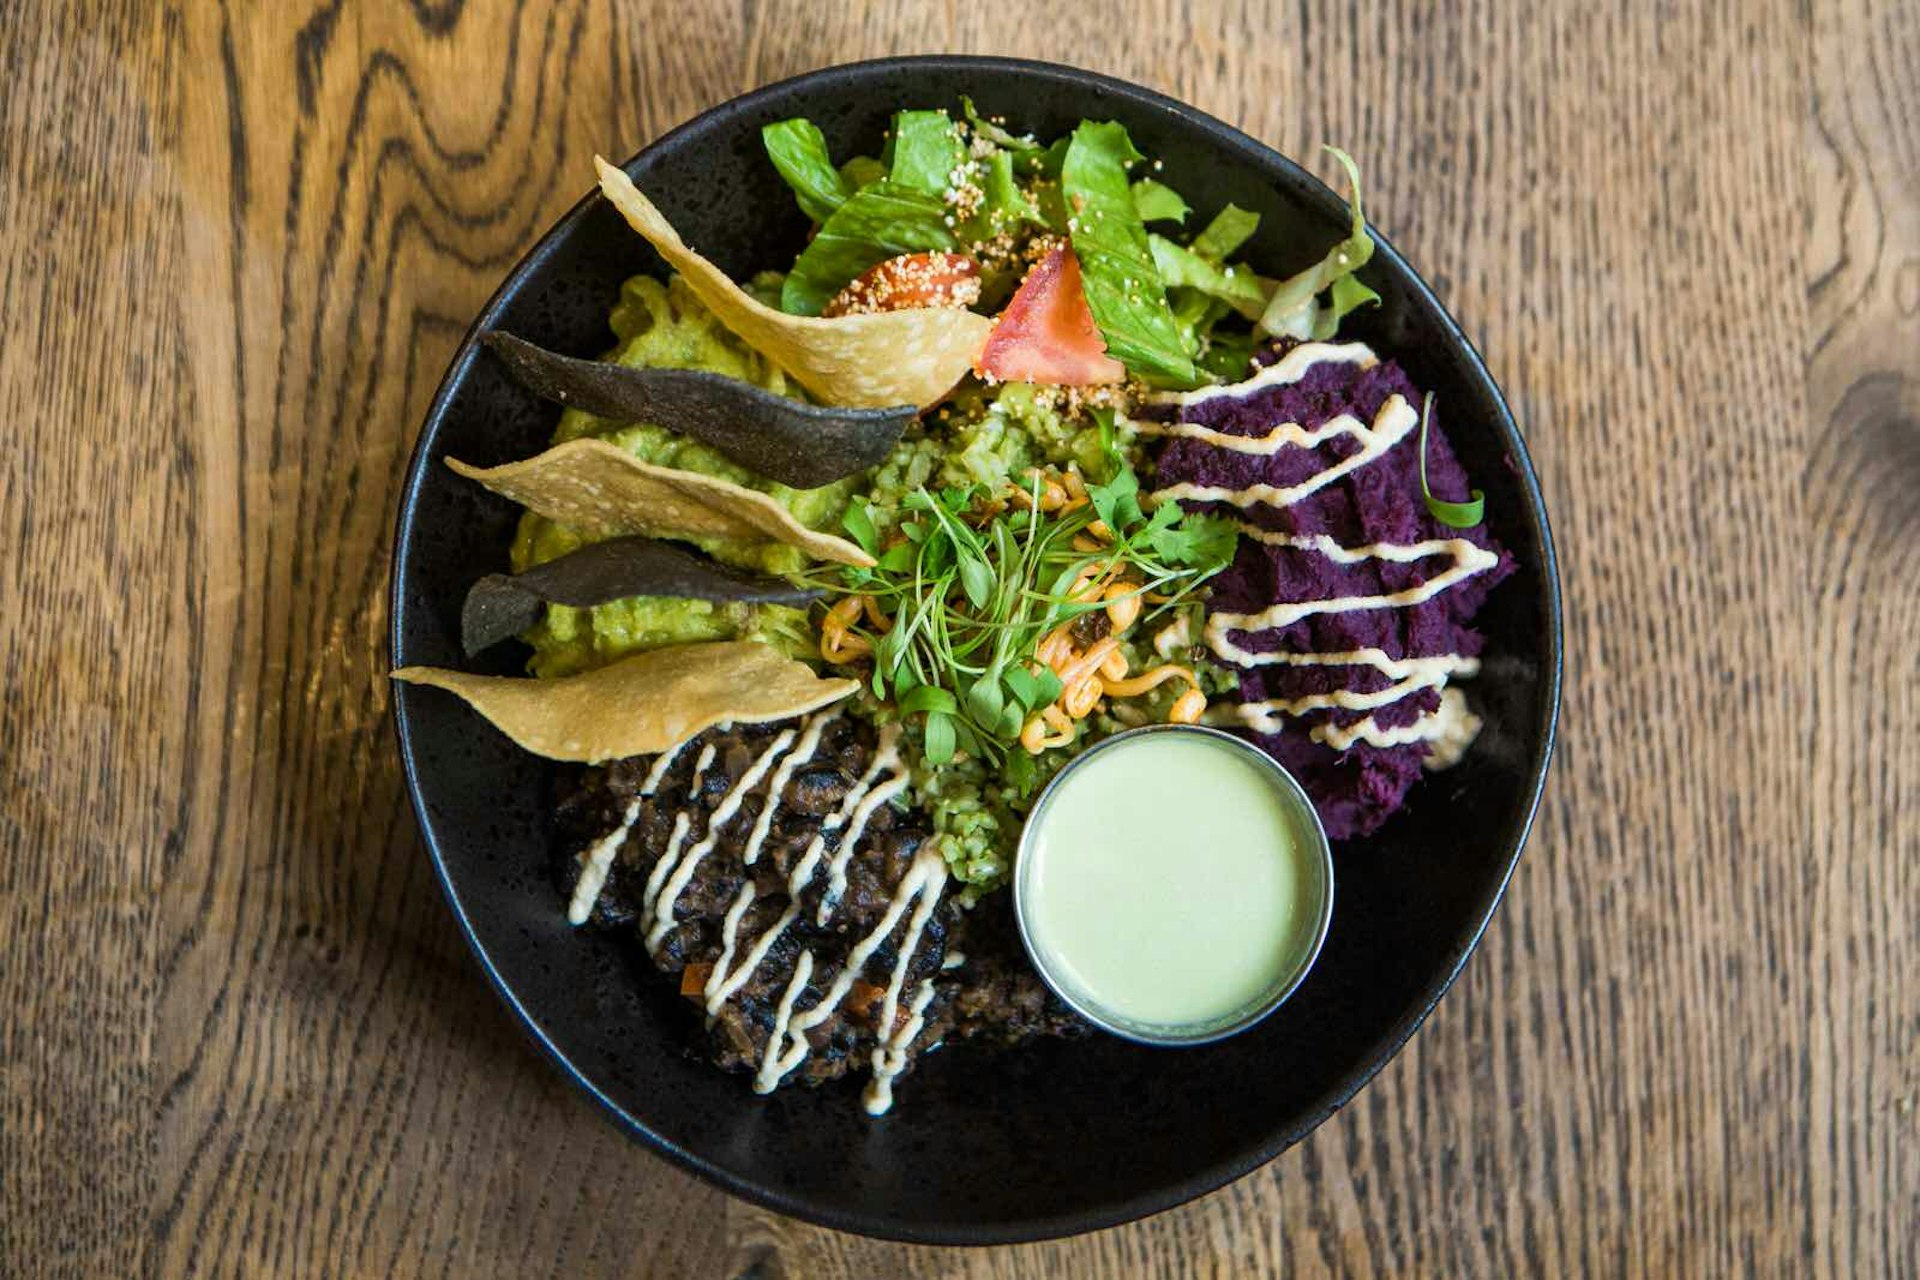 The Mexican bowl at Farmacy: sprouted coriander rice, romaine lettuce, tomatoes, guacamole, frijoles, chipotle ‘sour cream’, whipped squash, corn chips jalapeño dressing, arranged in a black bowl on a wooden table.